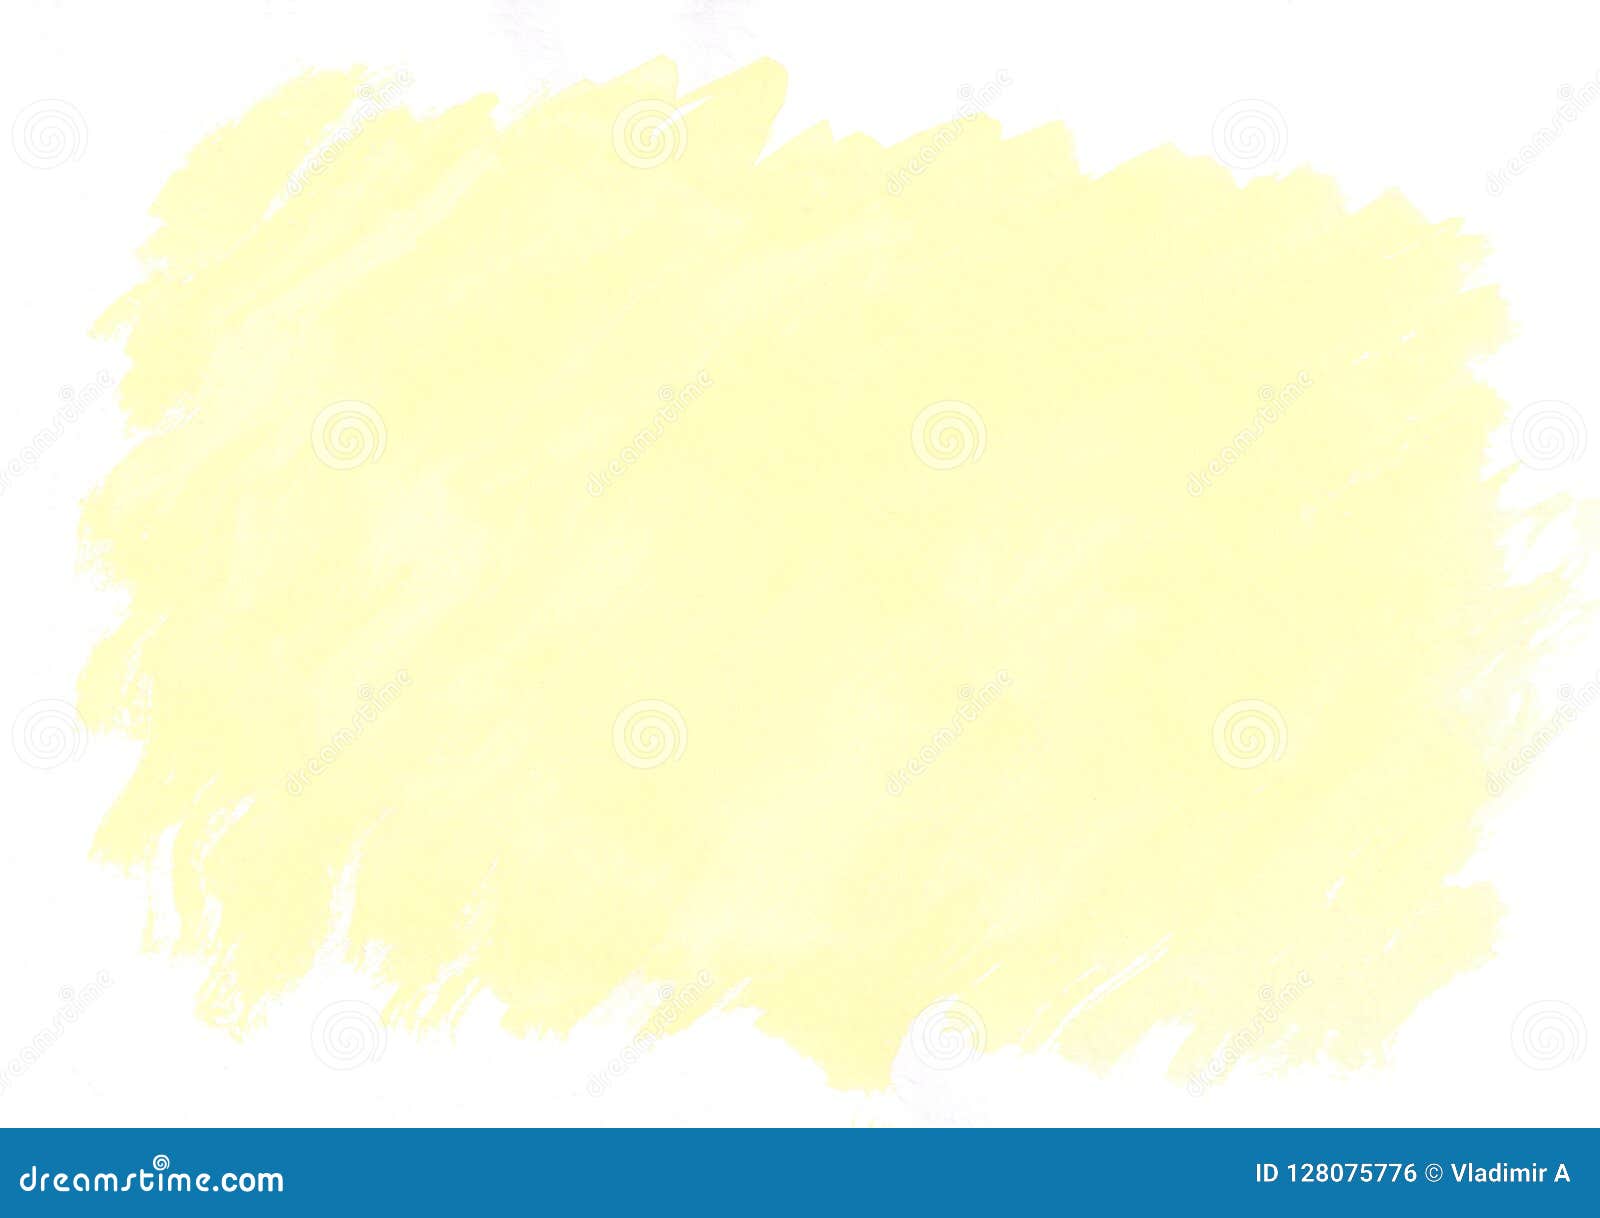 Light Yellow Watercolor Gradient Brush Strokes. Beautiful Abstract  Background Stock Illustration - Illustration of backdrop, wallpaper:  128075776